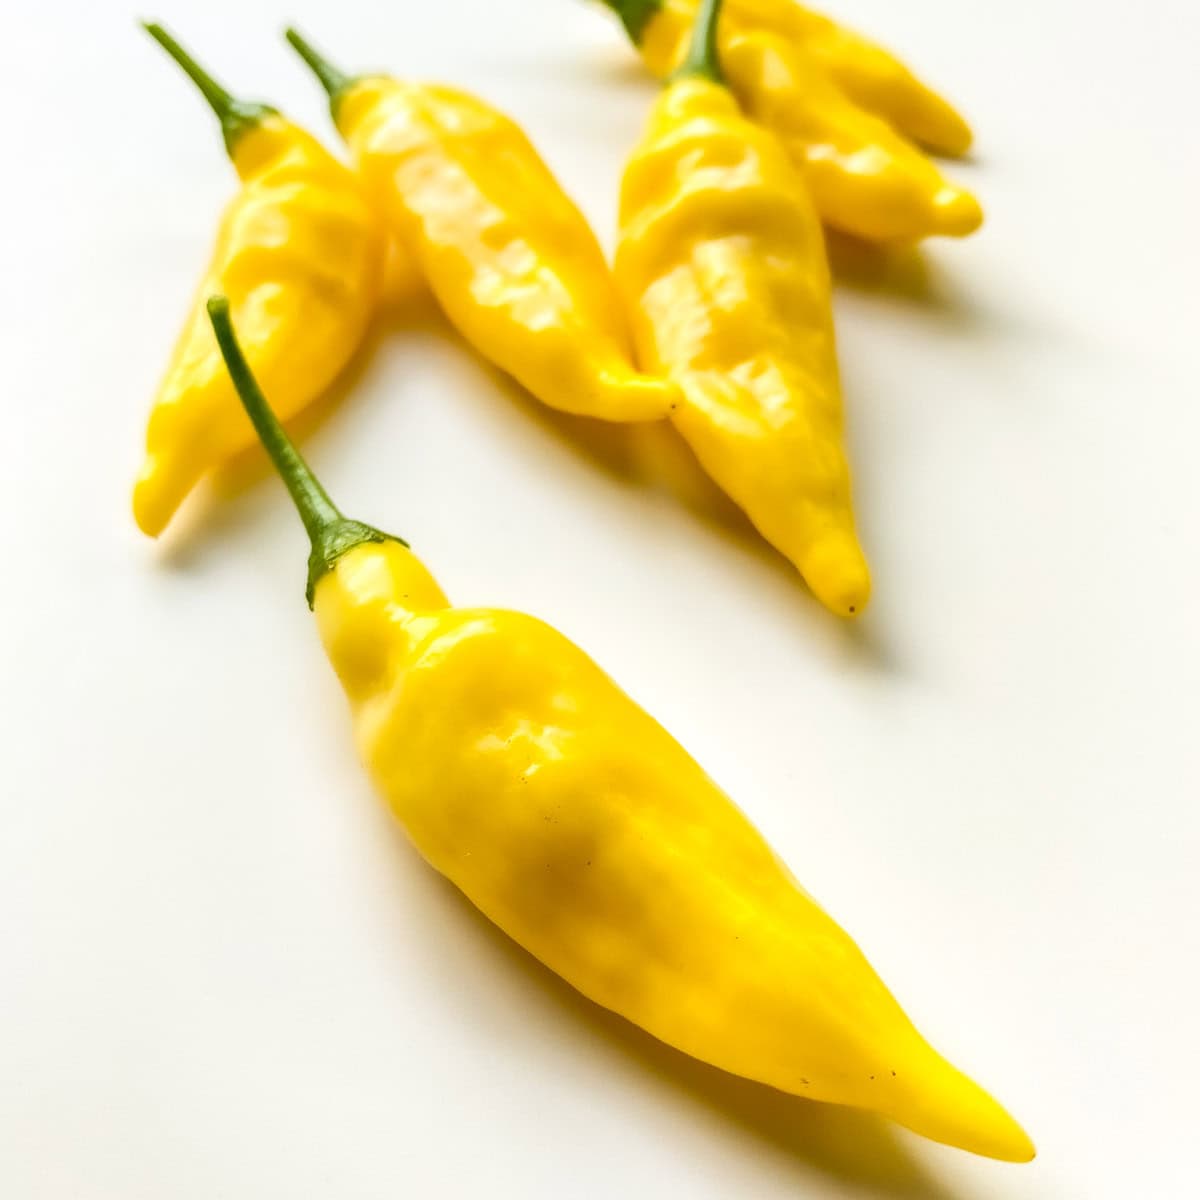 An image of aji amarillo peppers on a white countertop.